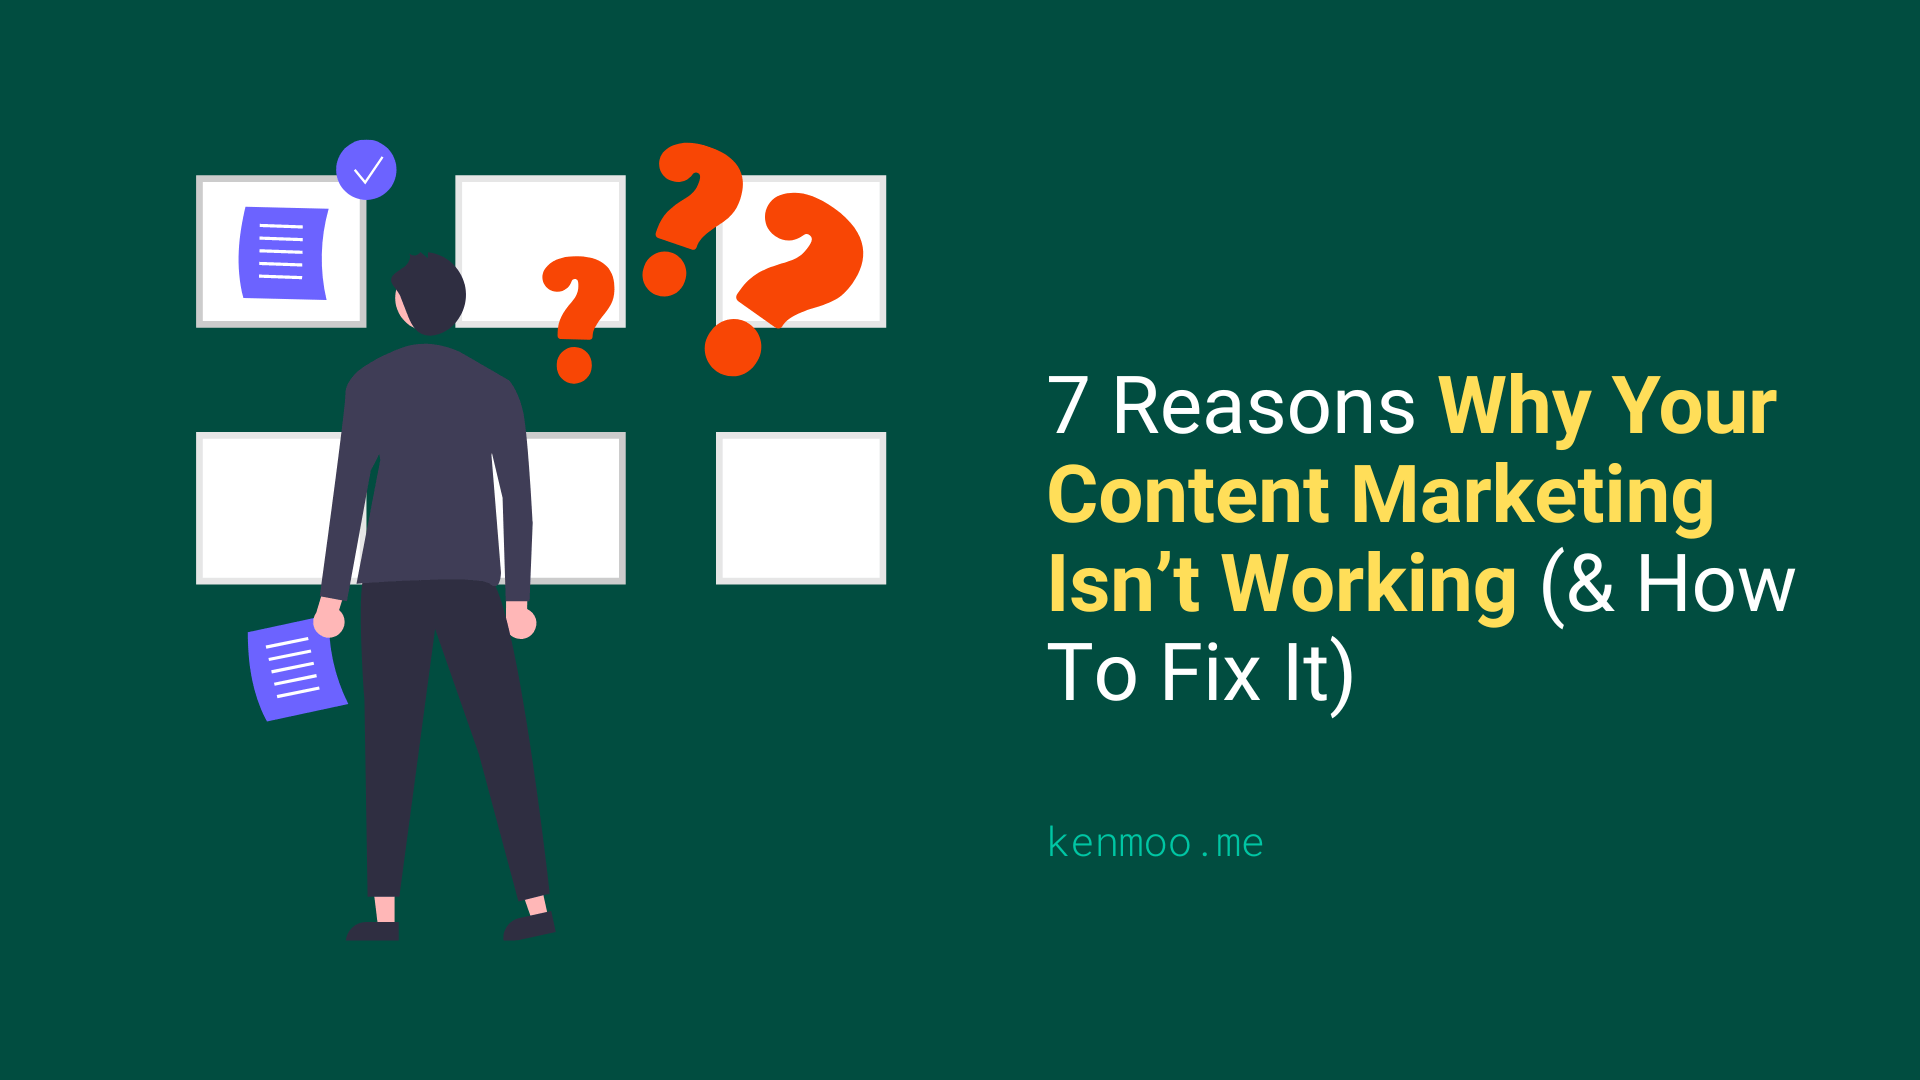 7 Reasons Why Your Content Marketing Isn’t Working